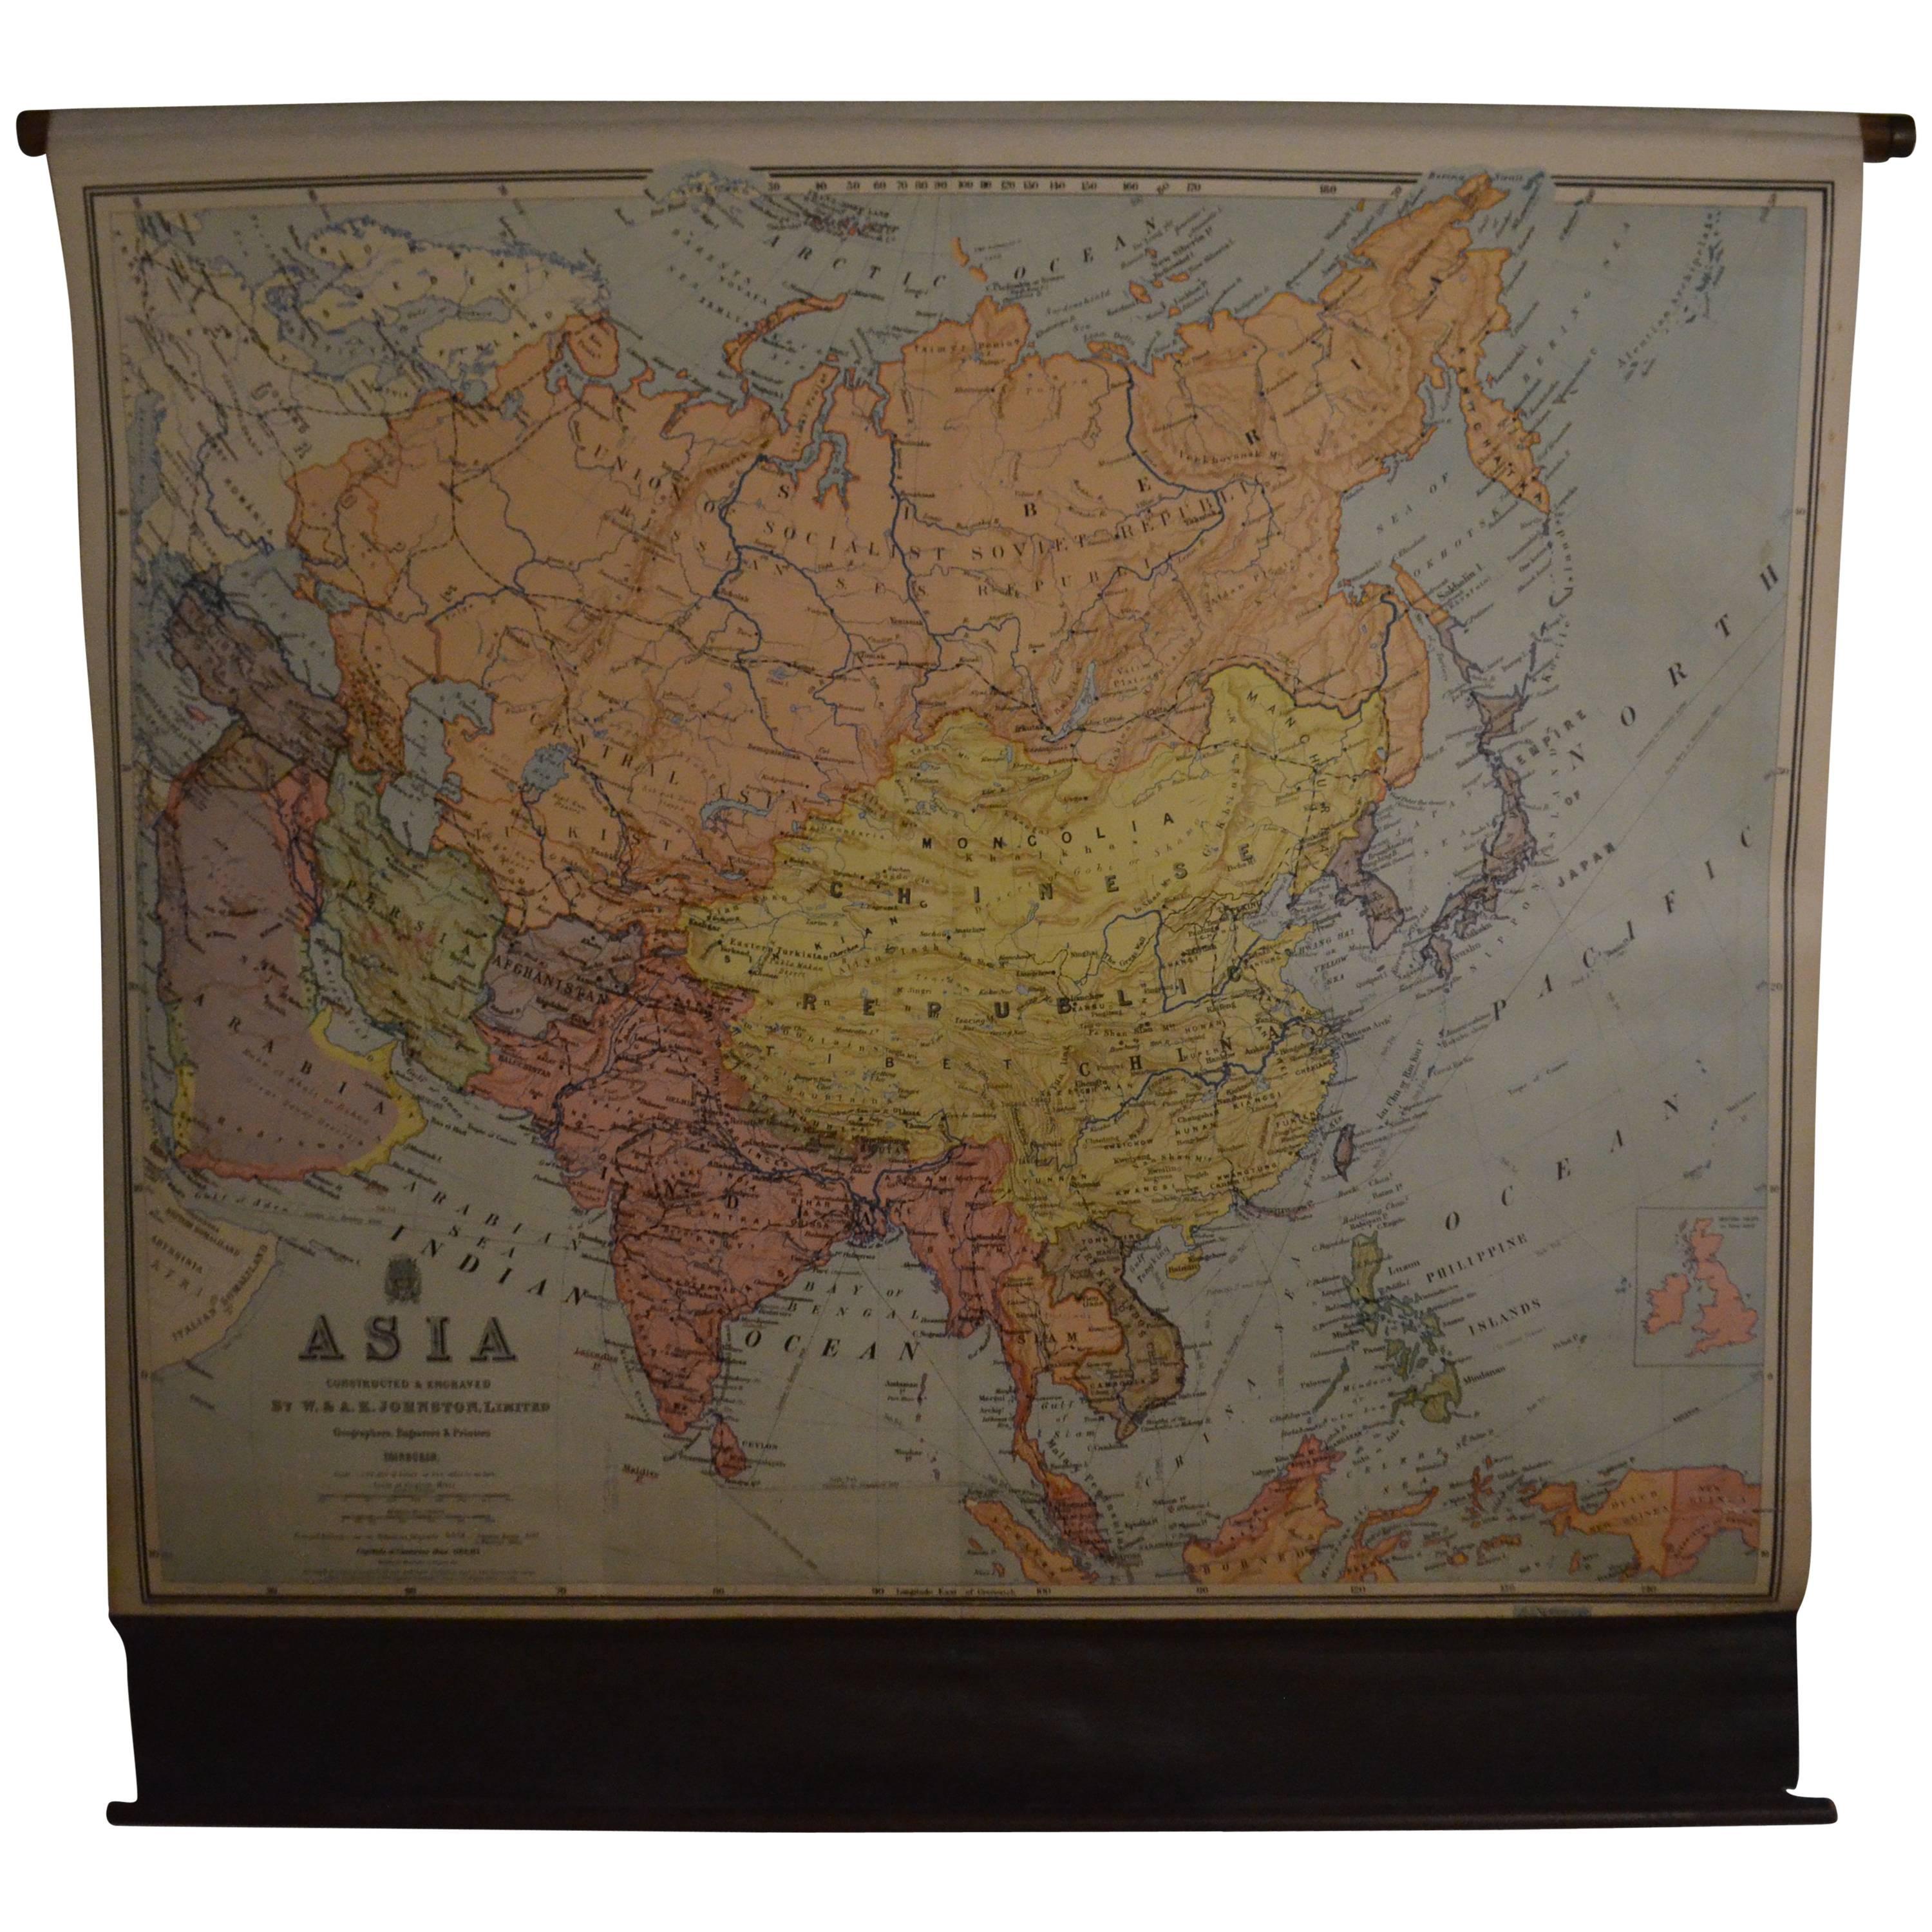 Map of Asia, Early 1900s